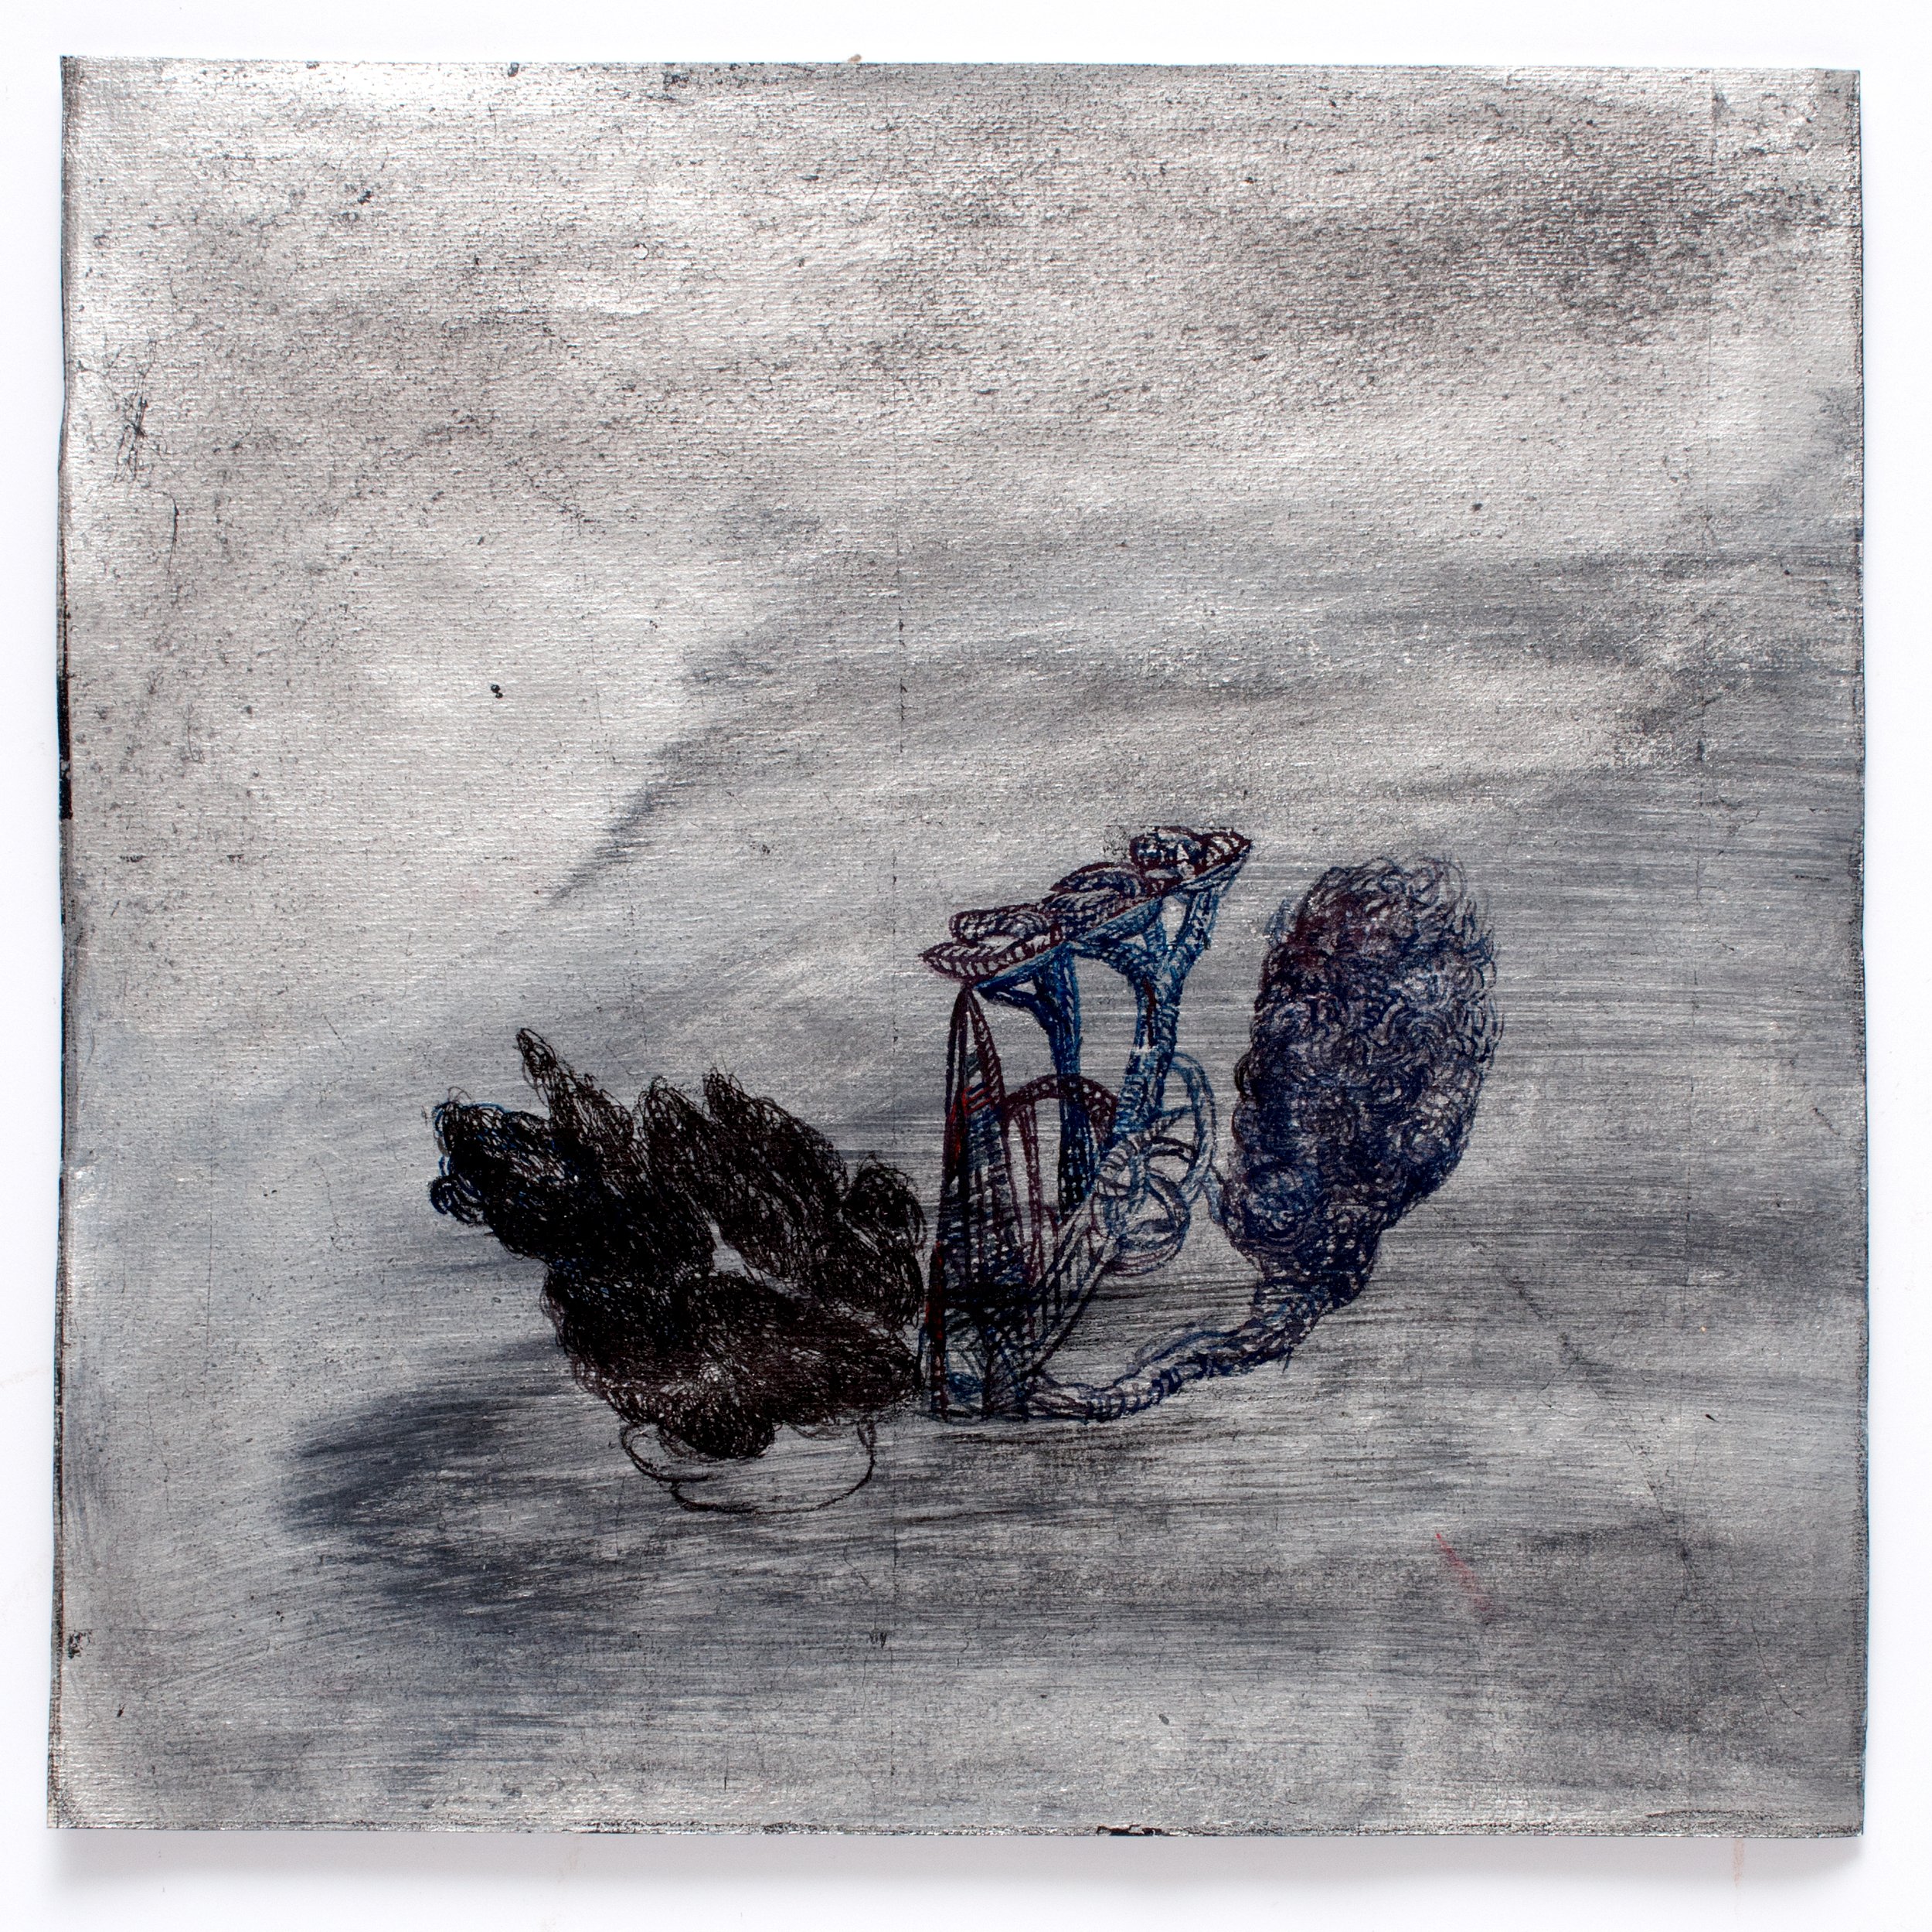   Everything is Still , 2014    Ink on silver leaf alloy on paper   12” x 12”       